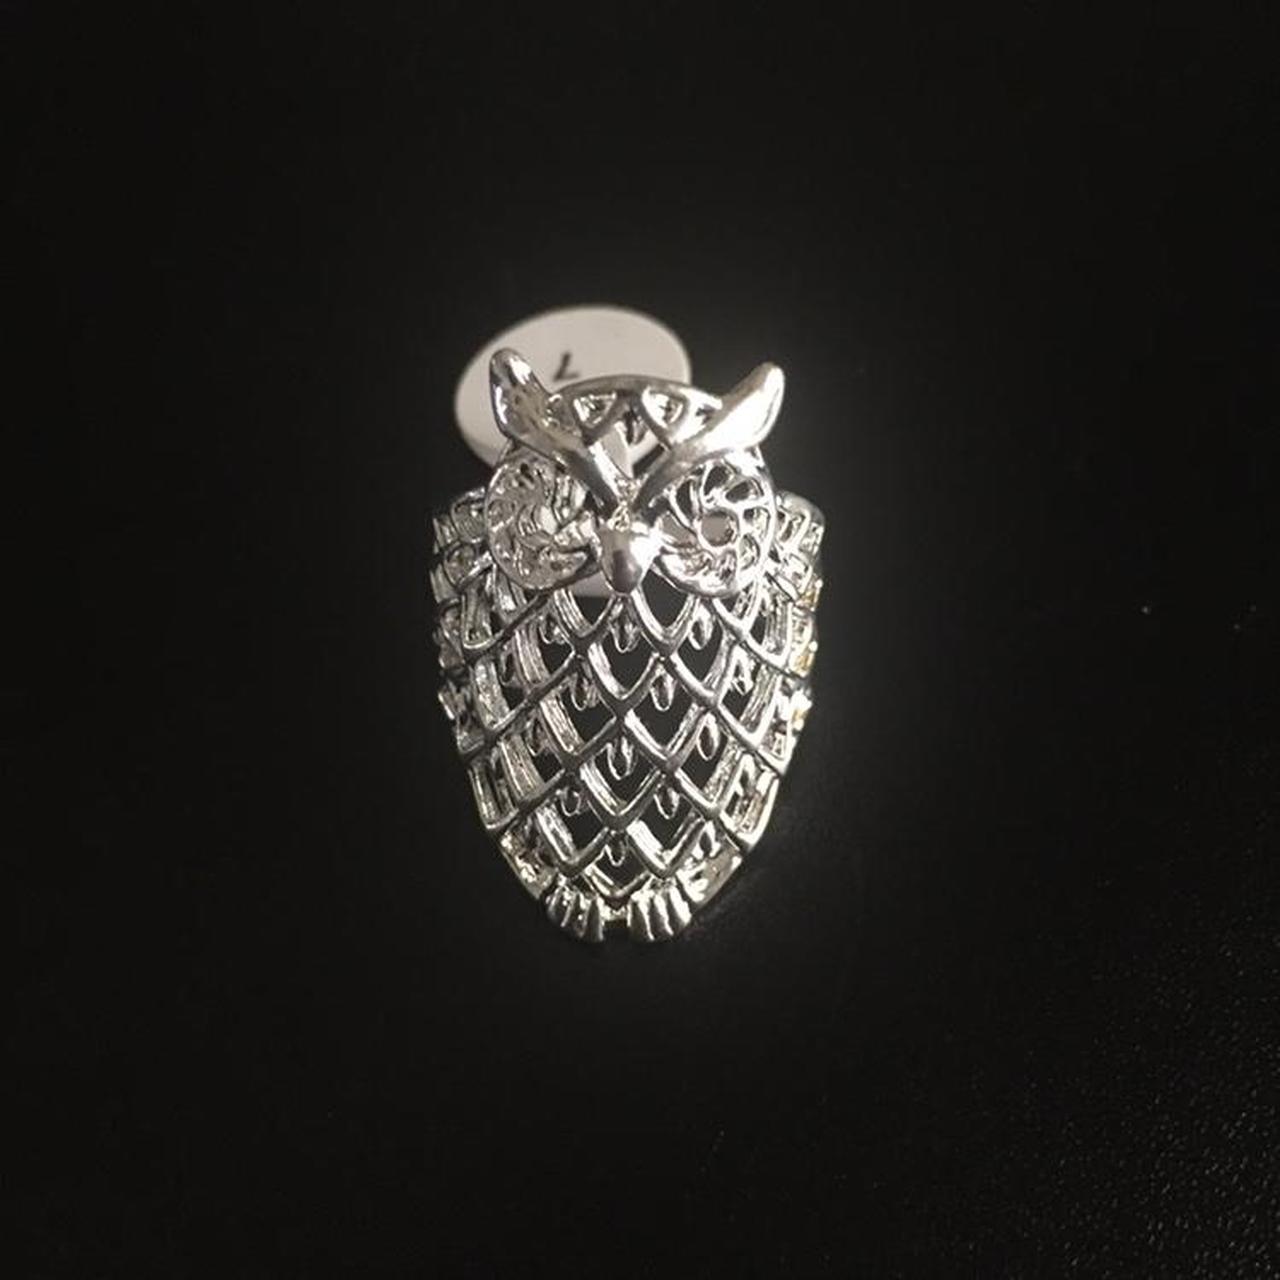 Product Image 1 - Silver owl ring size 7
Condition: